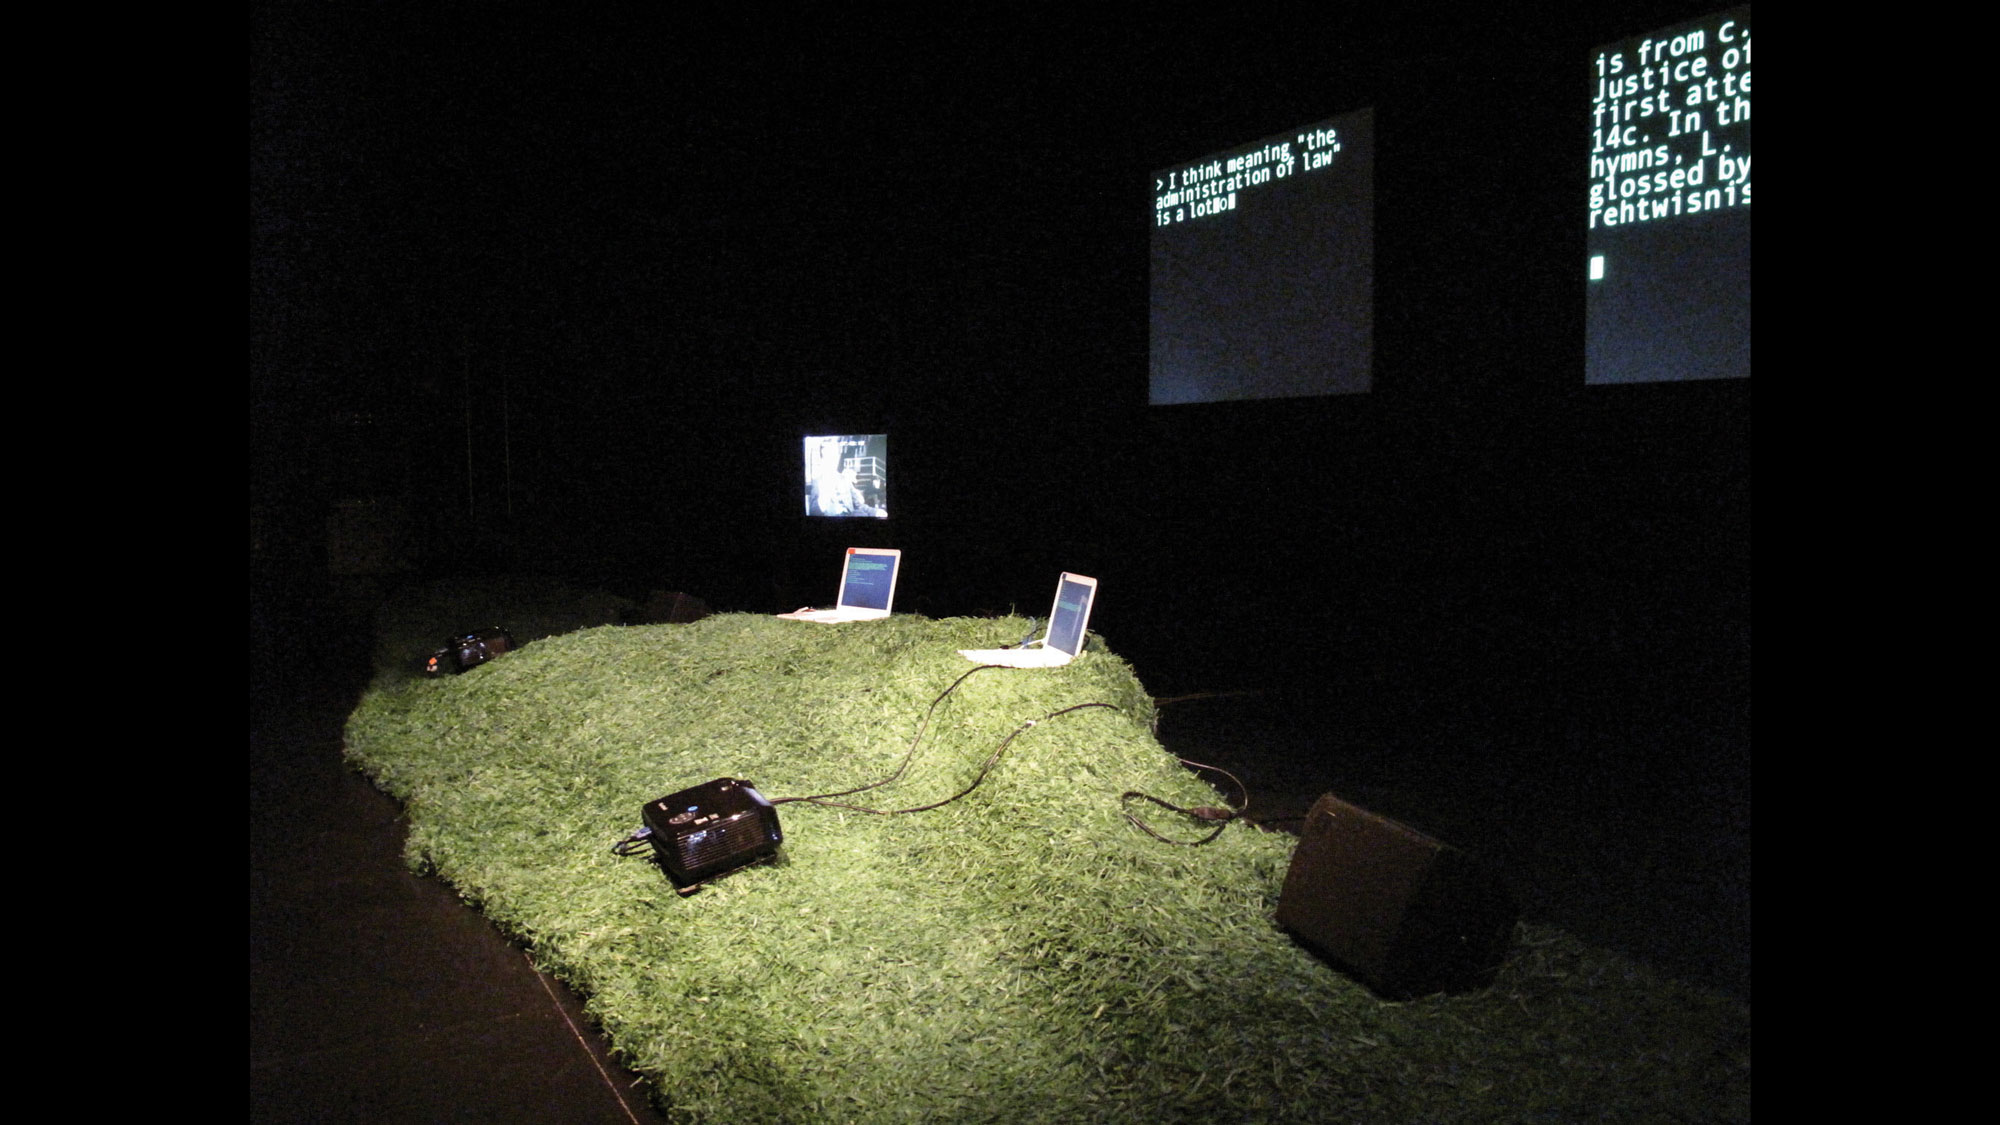 Two laptops sitting on an artificial grassy hill in front of two screens projecting blocky random text in a black box studio